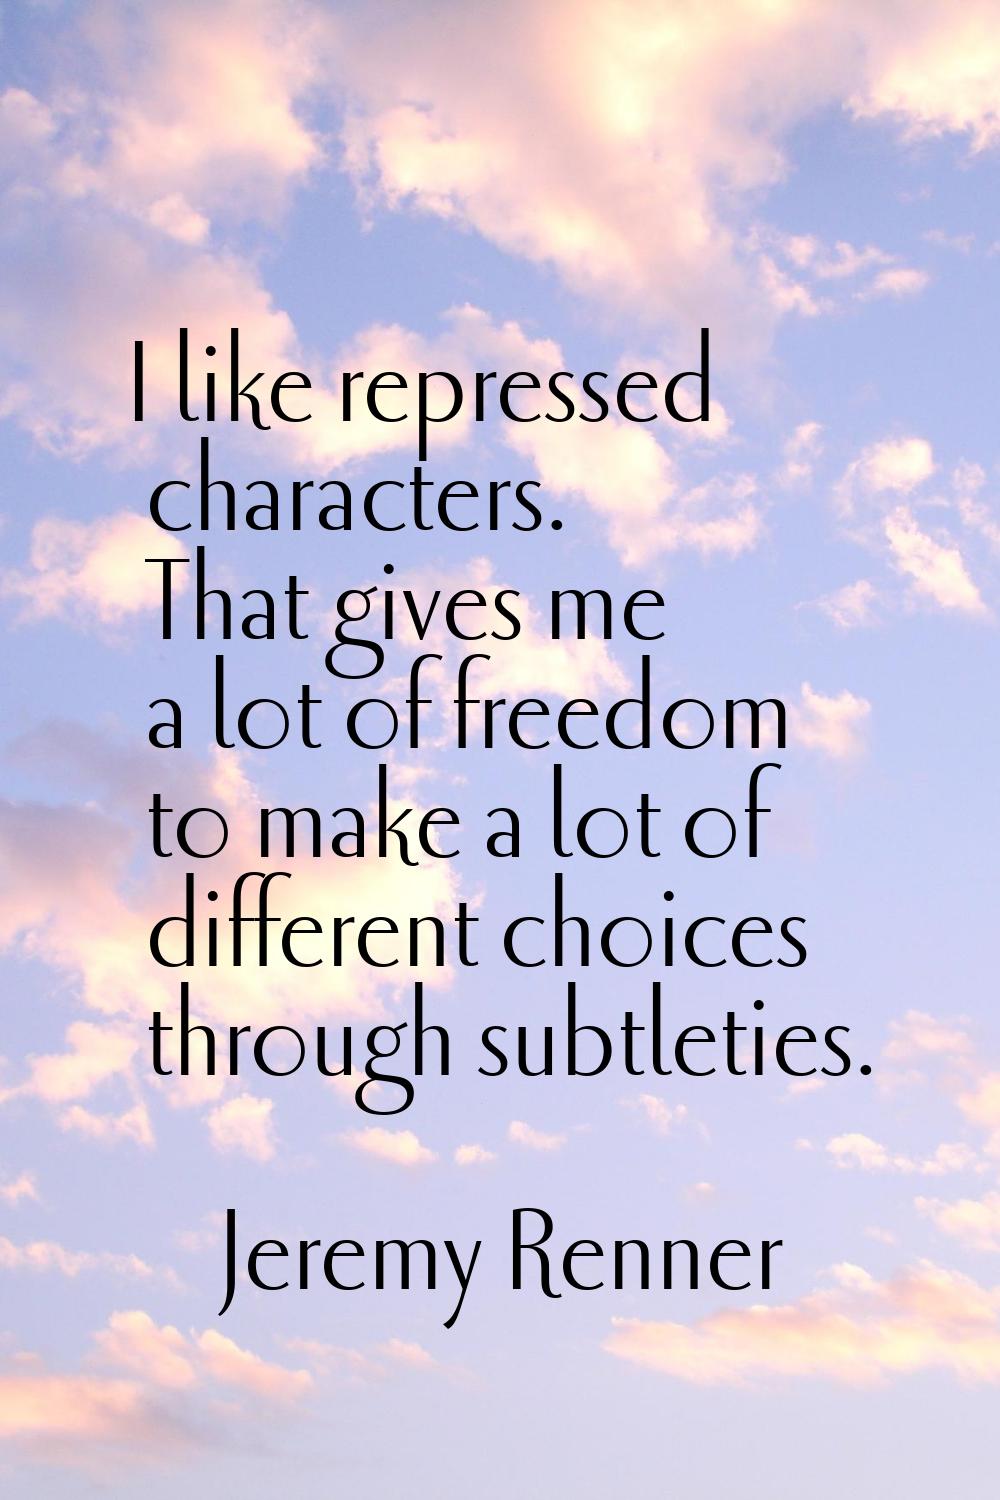 I like repressed characters. That gives me a lot of freedom to make a lot of different choices thro